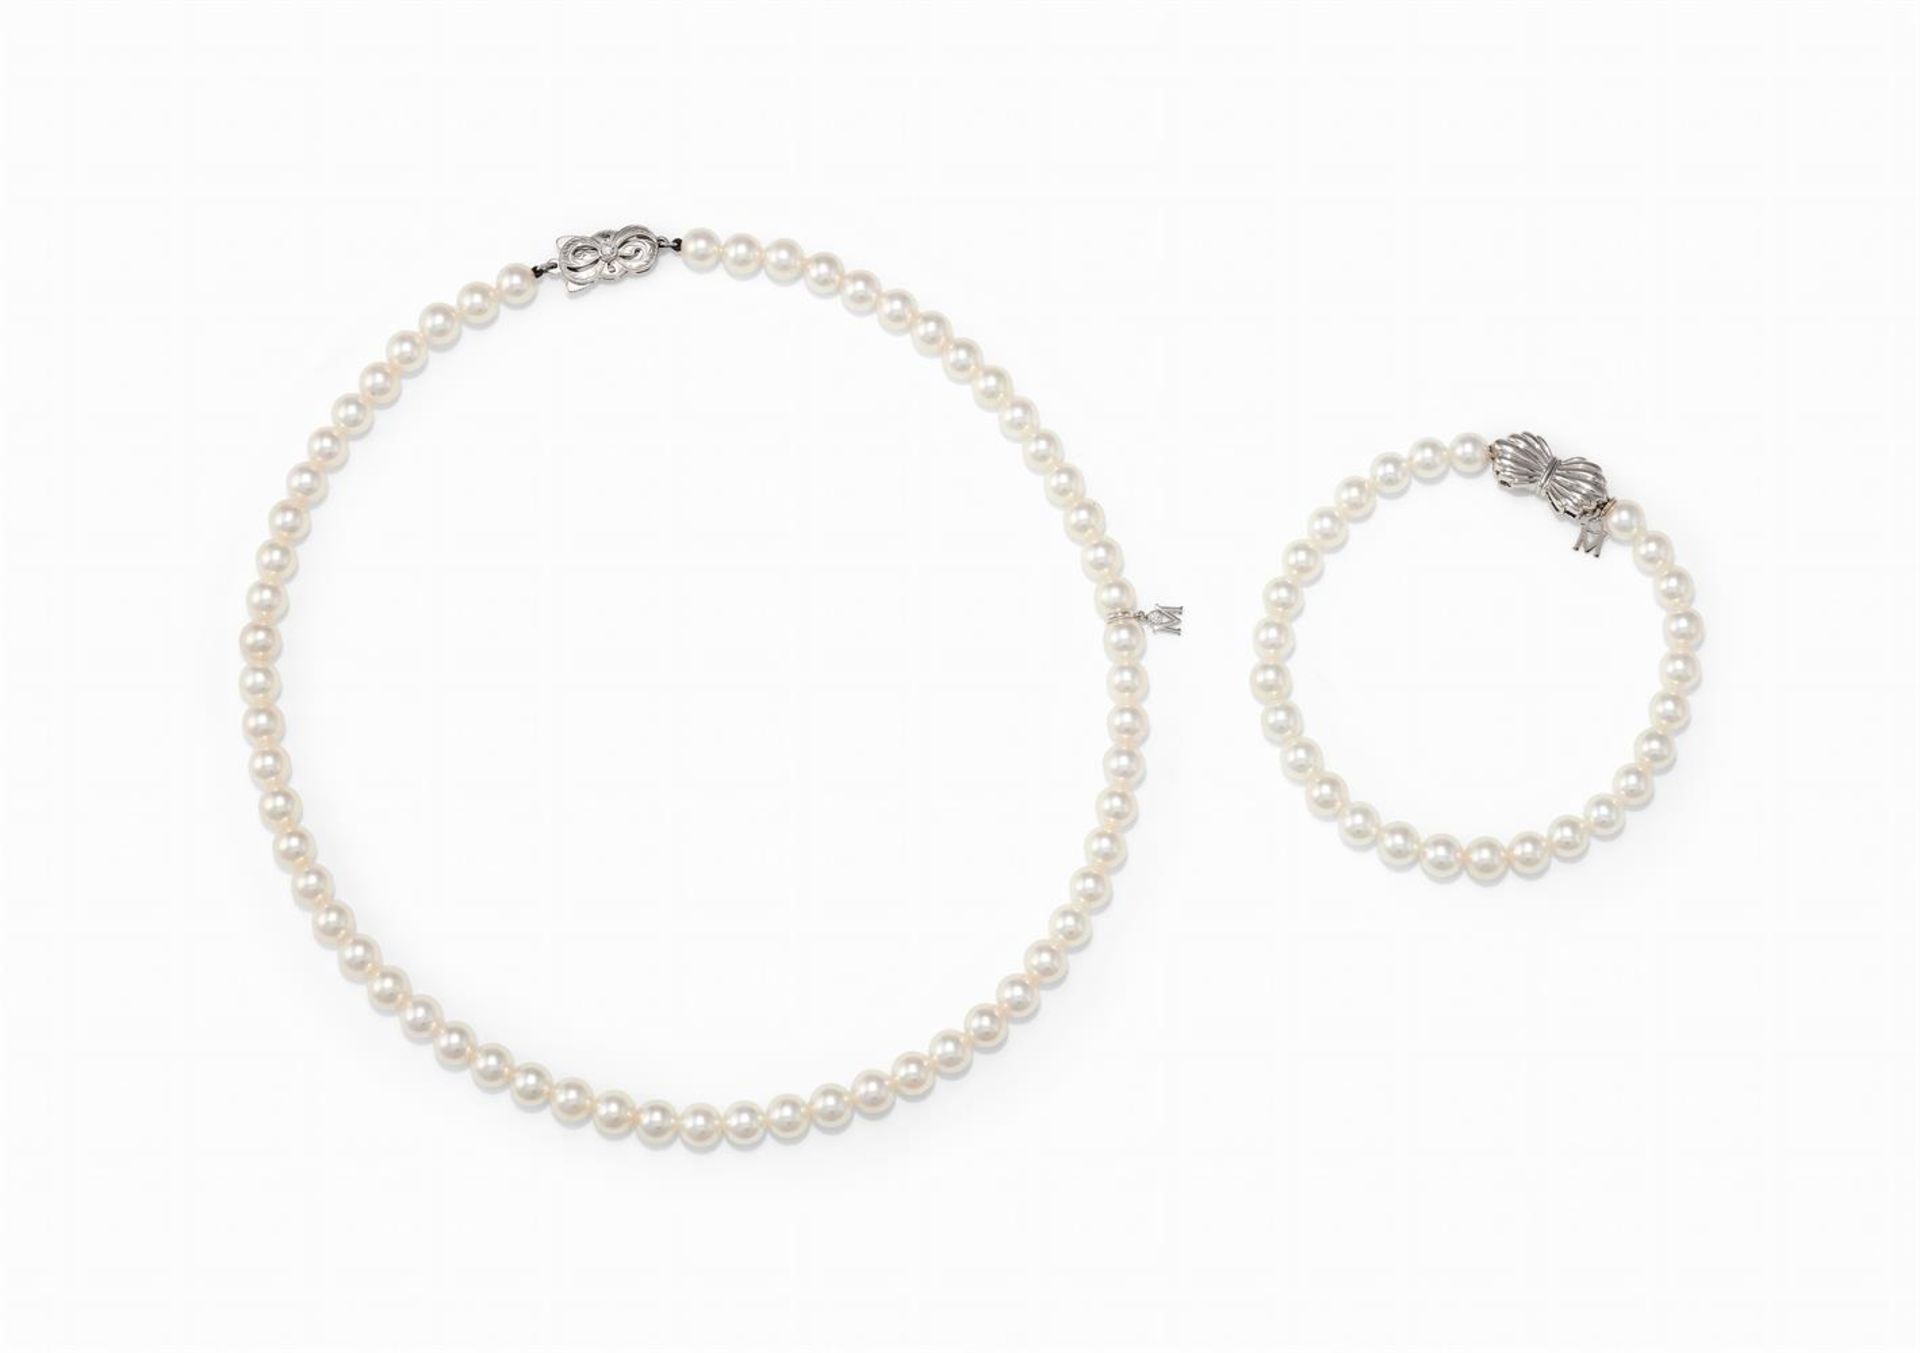 MIKIMOTO, A 'BEST OF THE BEST' CULTURED PEARL NECKLACE AND SIMILAR BRACELET - Image 2 of 2